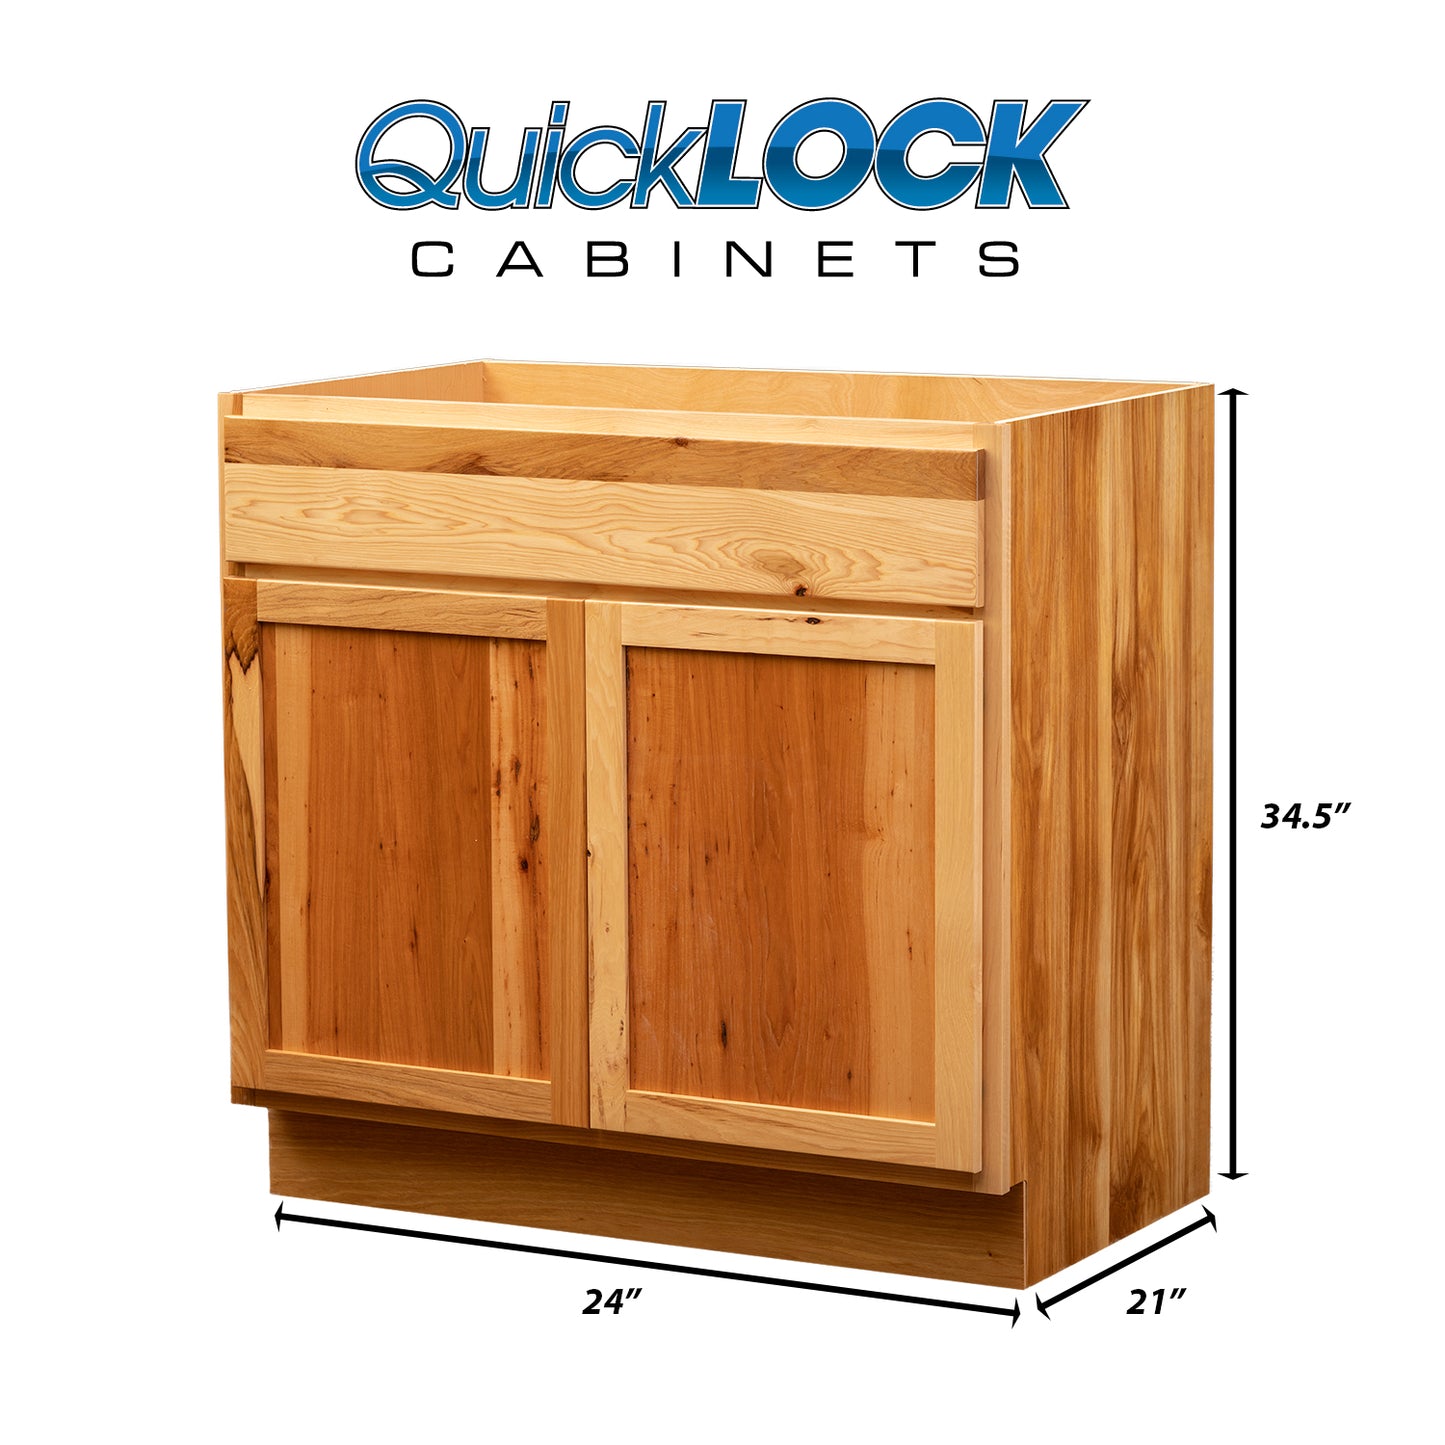 Quicklock RTA (Ready-to-Assemble) Rustic Hickory Vanity Base Cabinet | 24"Wx34.5"Hx21"D